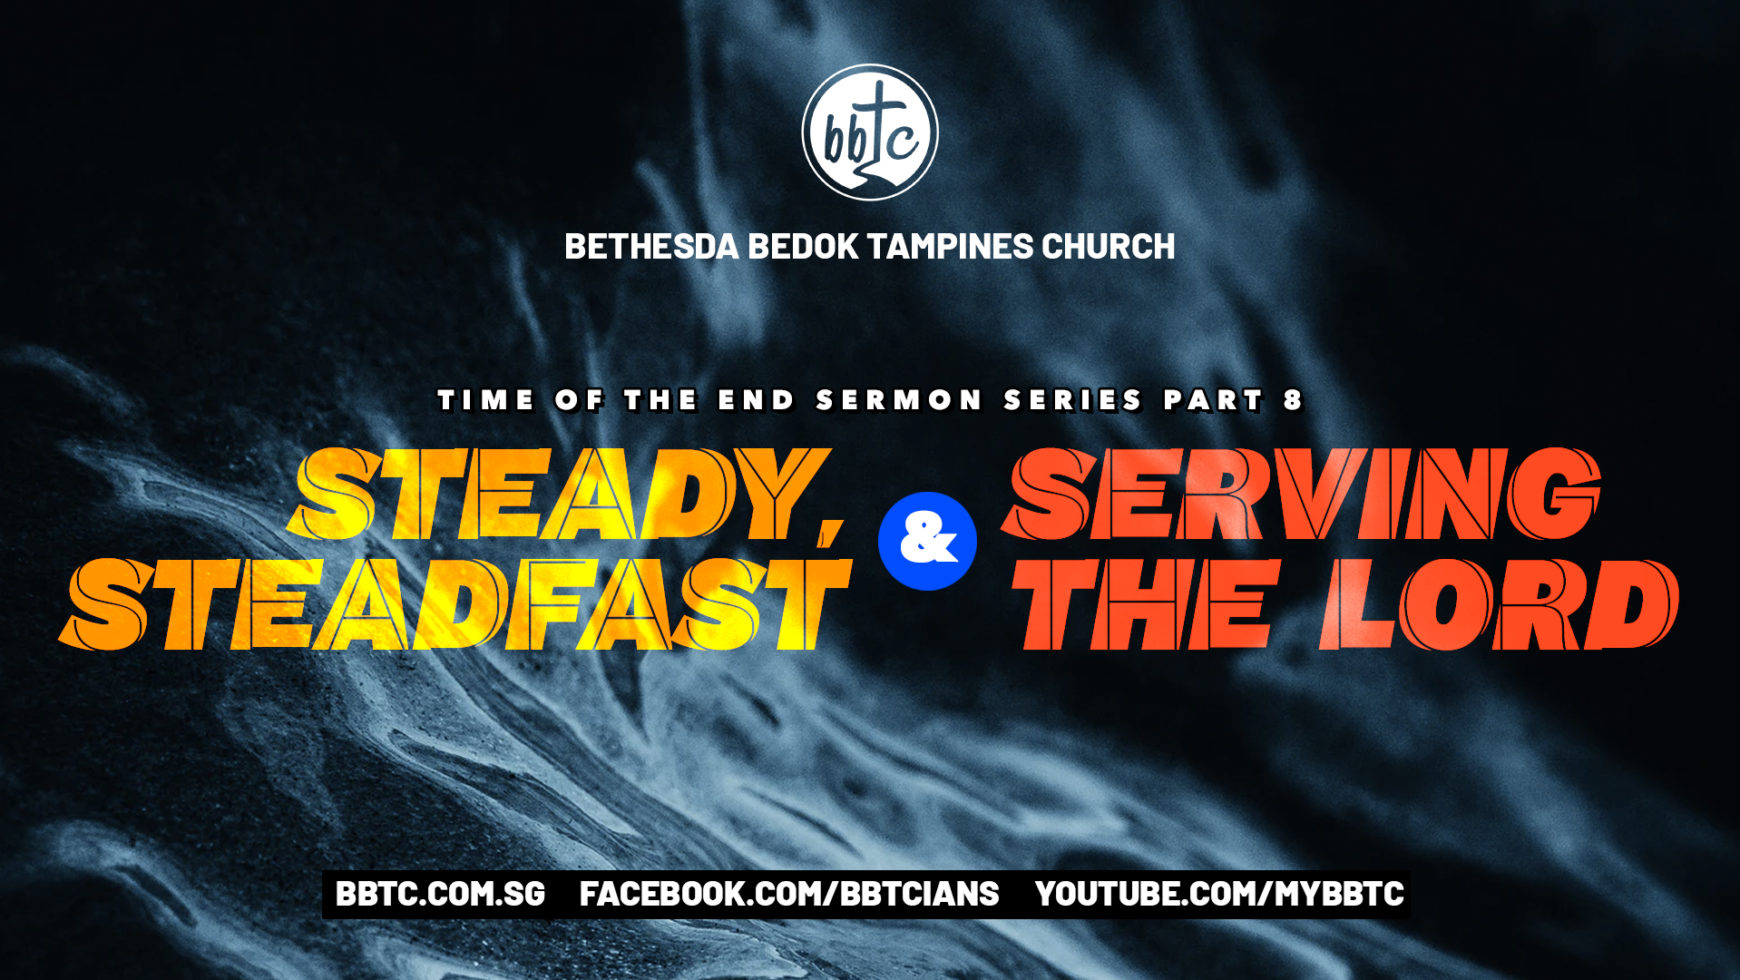 STEADY, STEADFAST & SERVING THE LORD